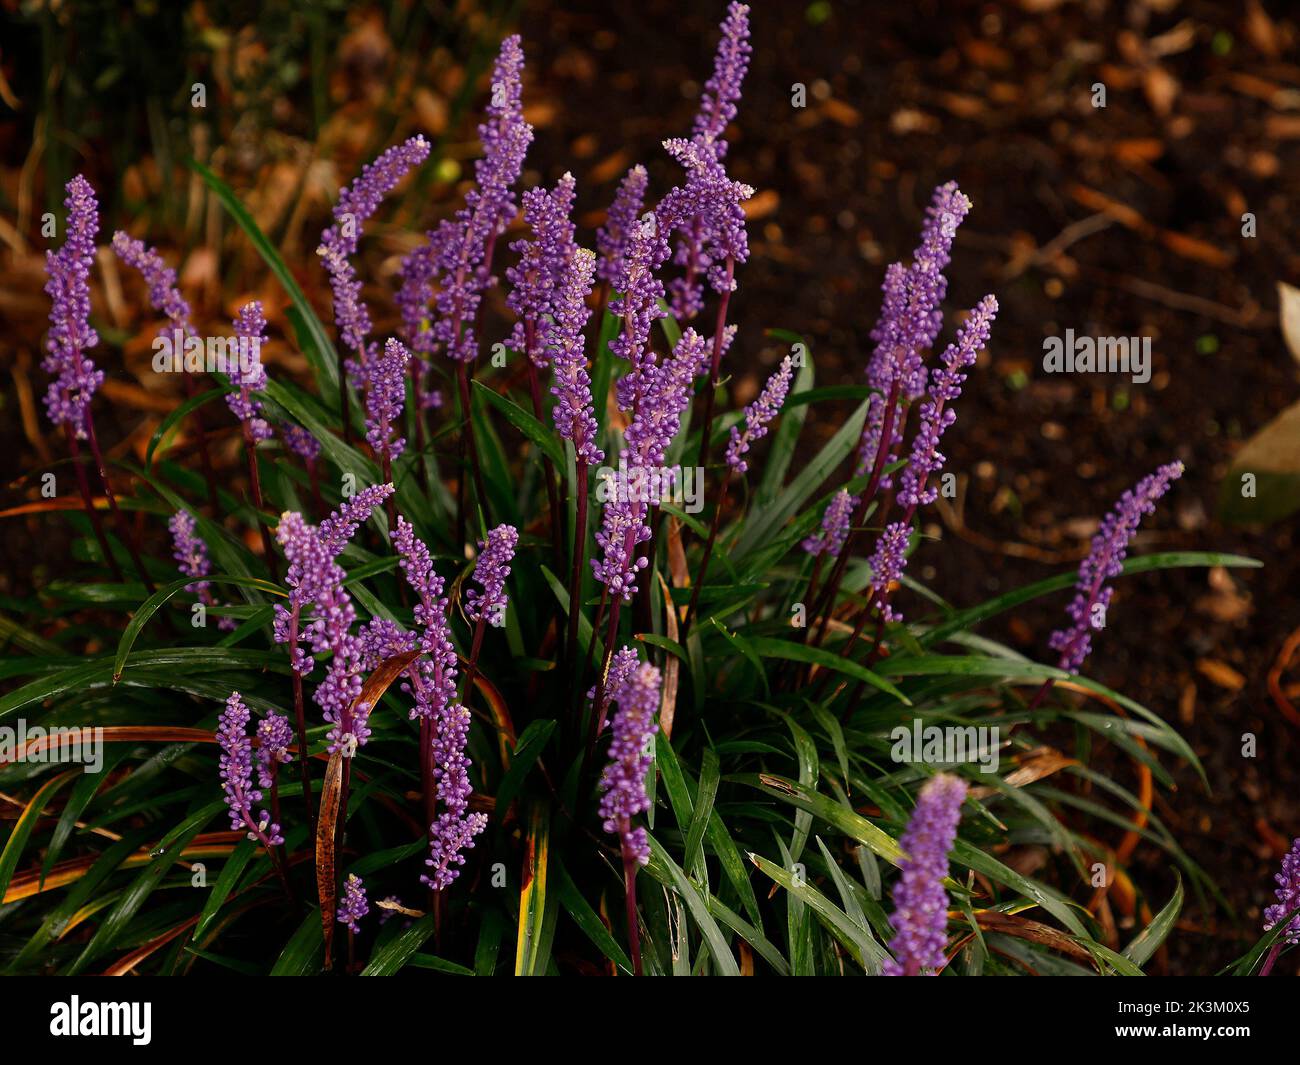 Close up of the tuberous herbaceous perennial evergreen flowering plant Liriope muscari or big blue lilyturf low growing with grass like leaves. Stock Photo